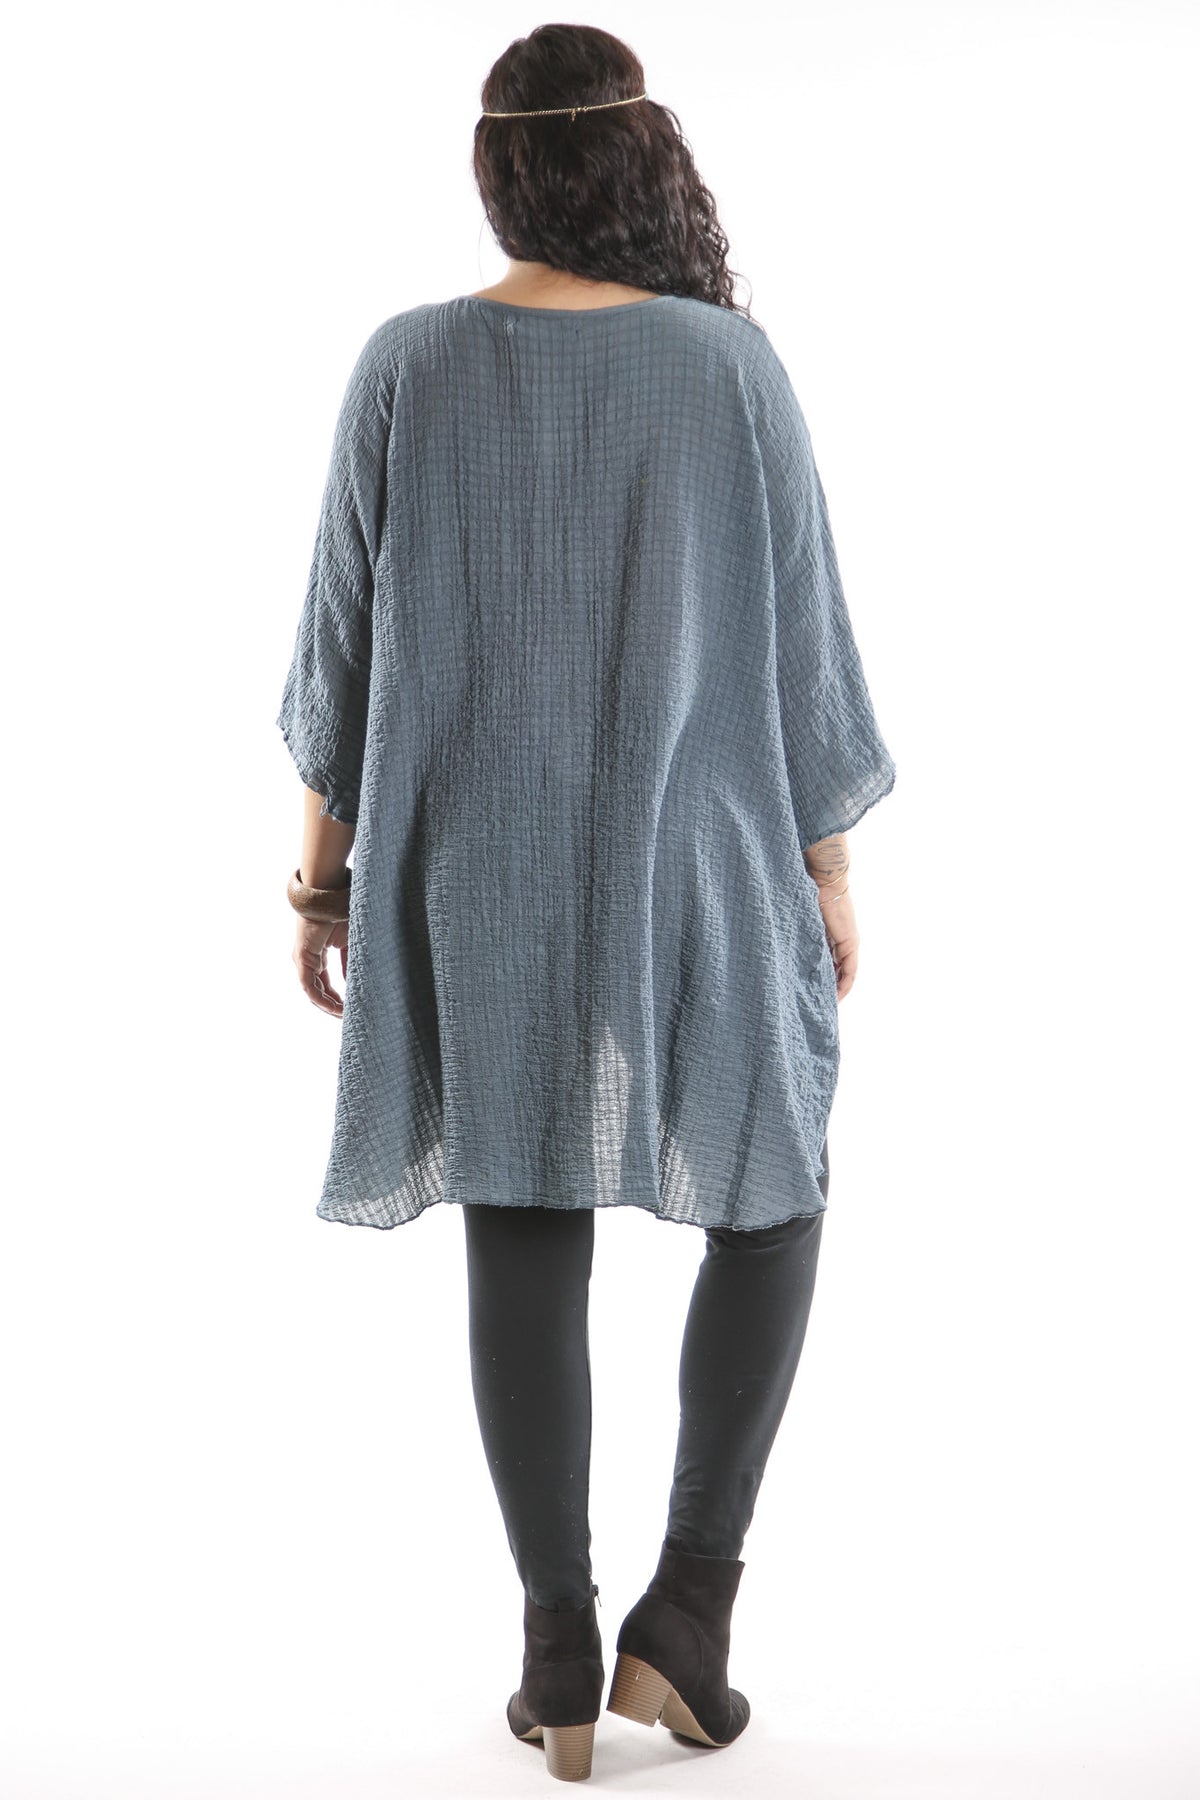 Hand Dyed Ana Tunic 2282- Forest Lake